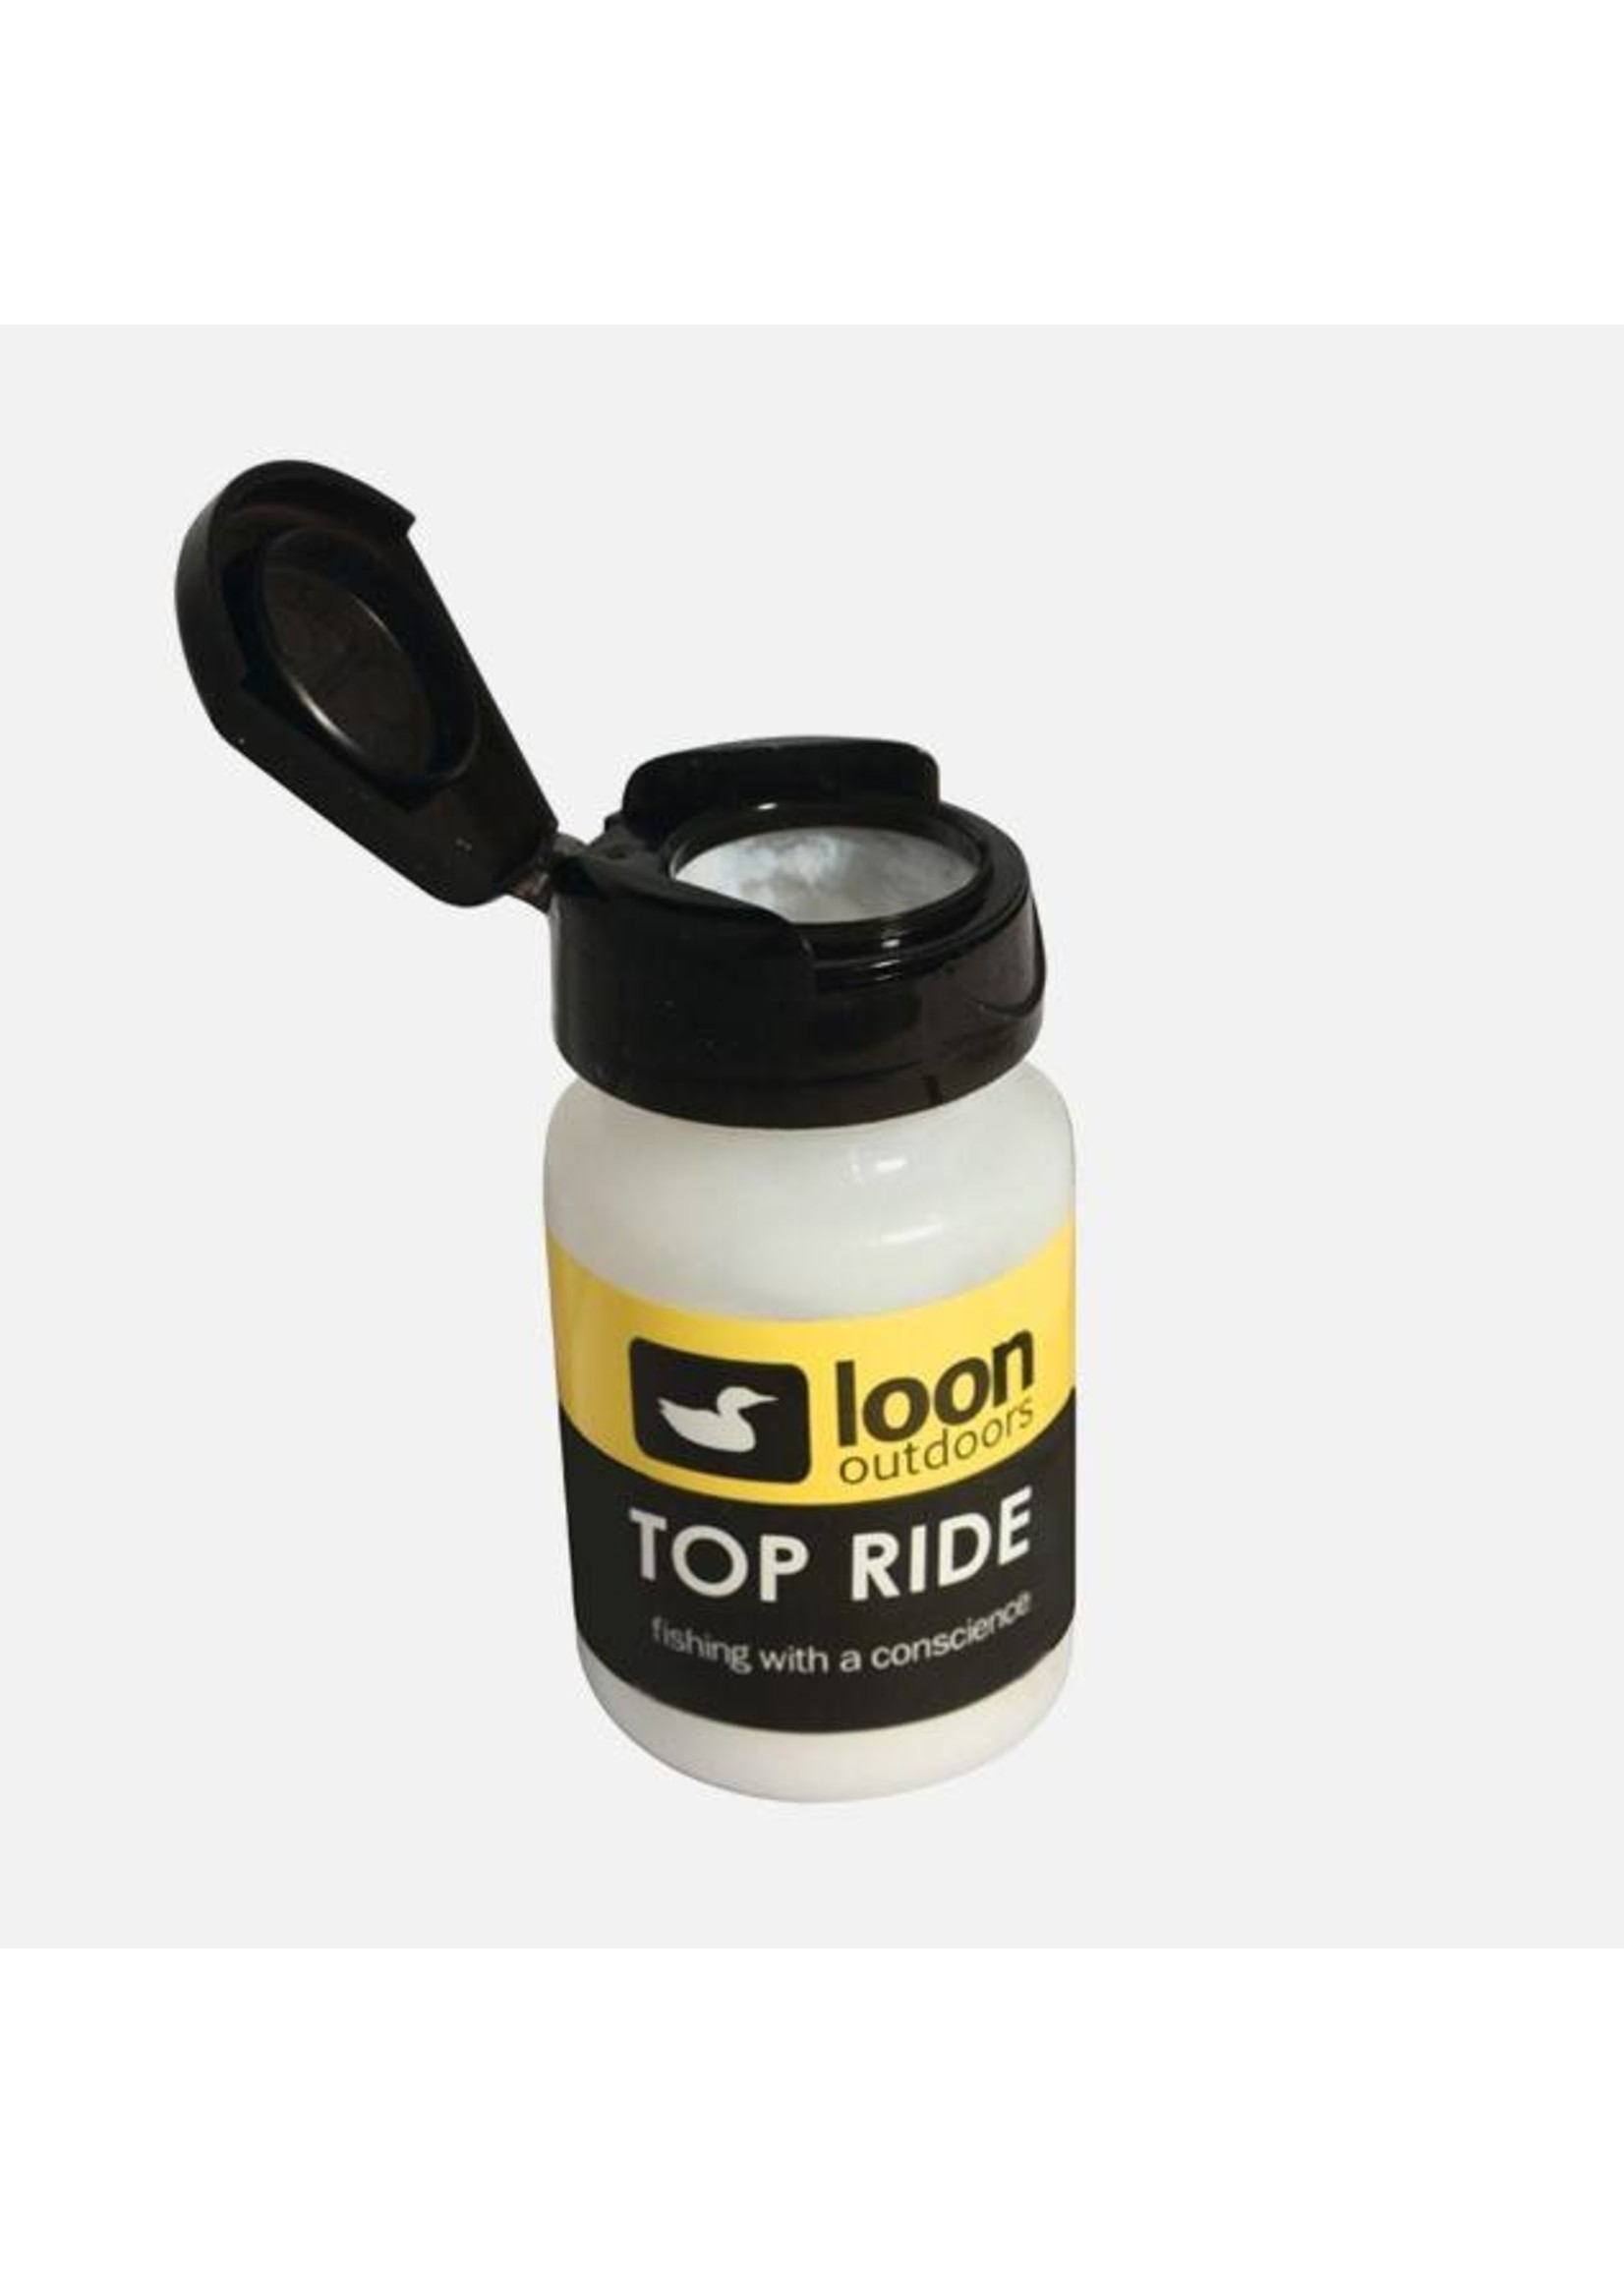 Loon Outdoors Loon Outdoors Top Ride